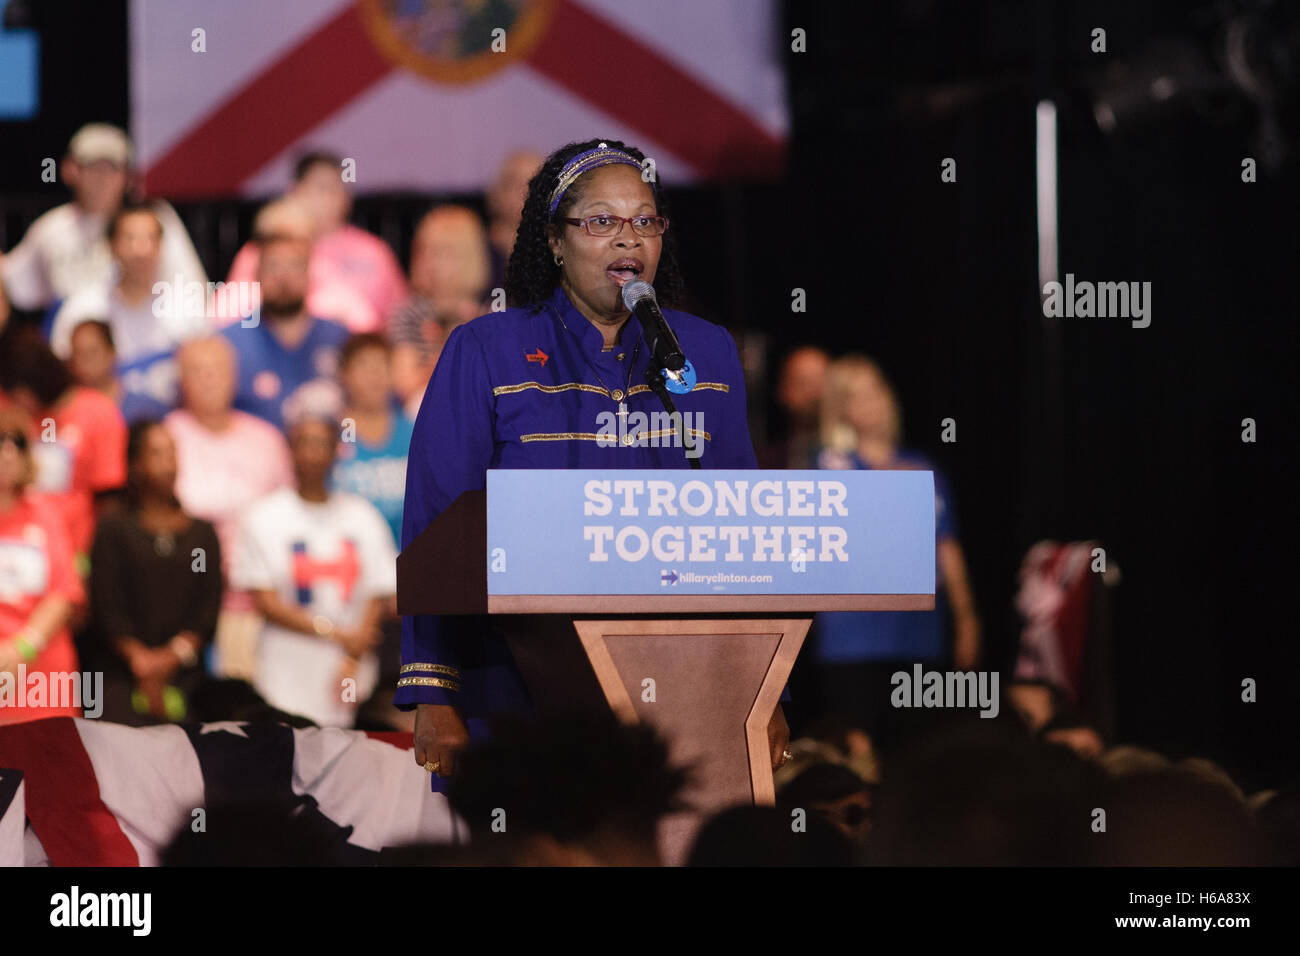 Angela Kelly singing the National Anthem at Hillary Clinton campaign rally at Broward College, Coconut Creek, FL. October 25, 2016 Stock Photo